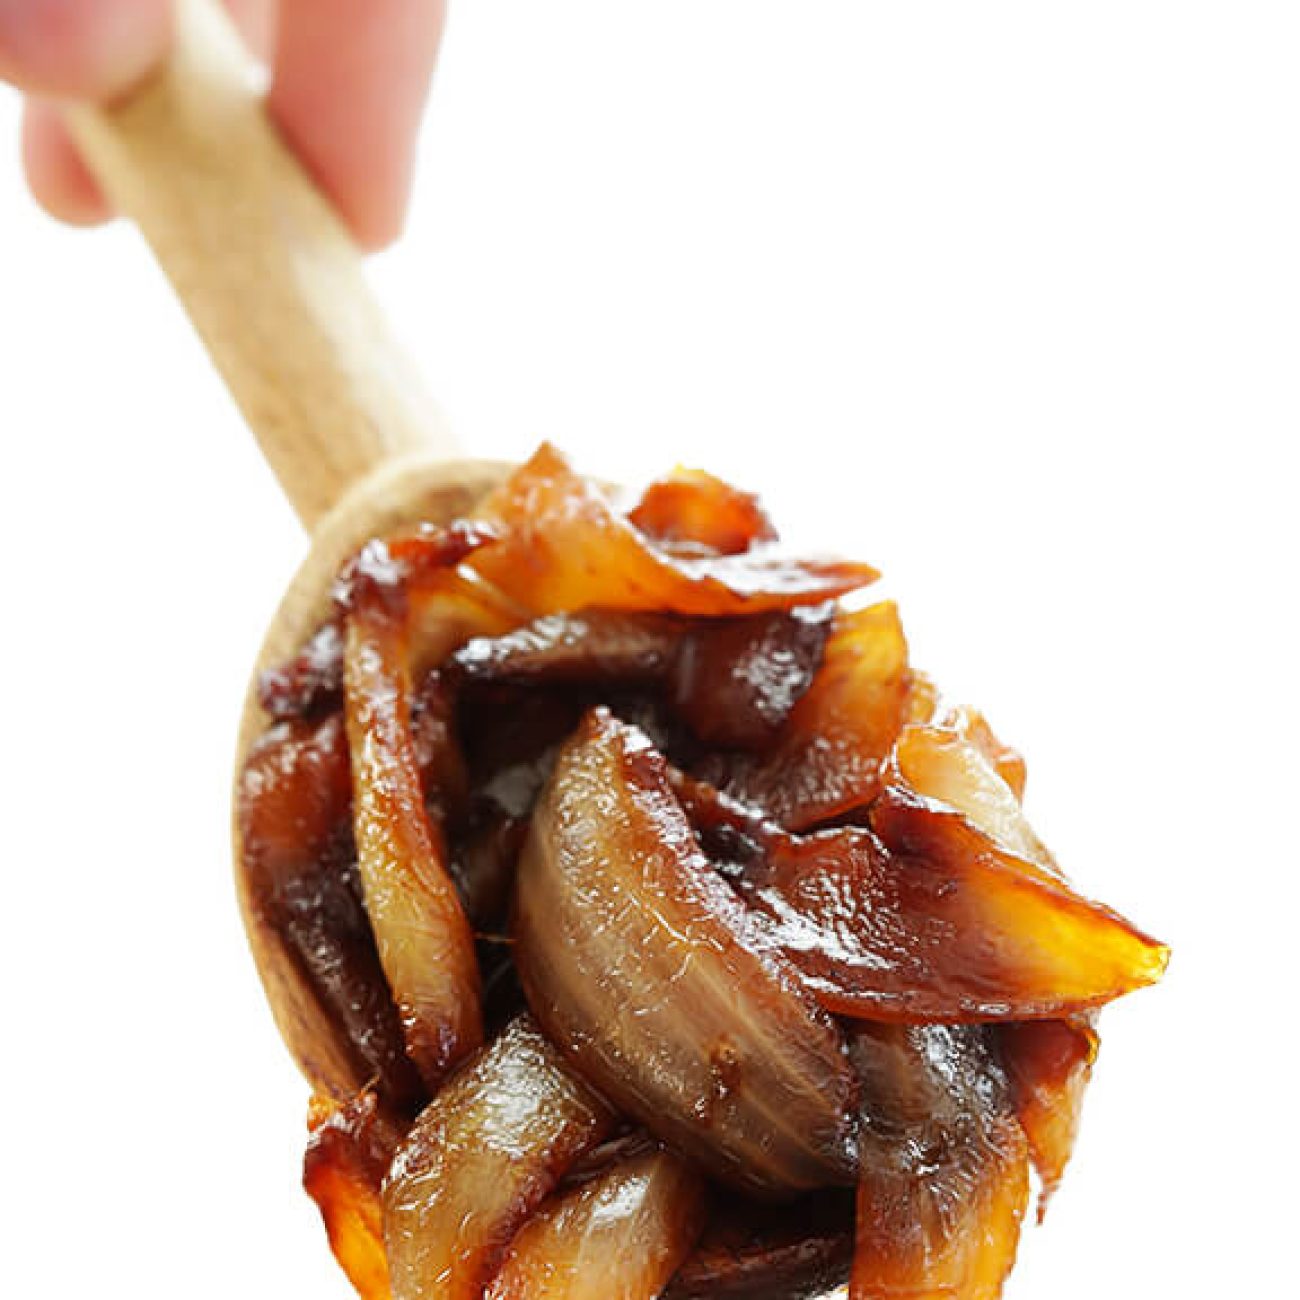 Caramelized Onions For The Grill Or Oven